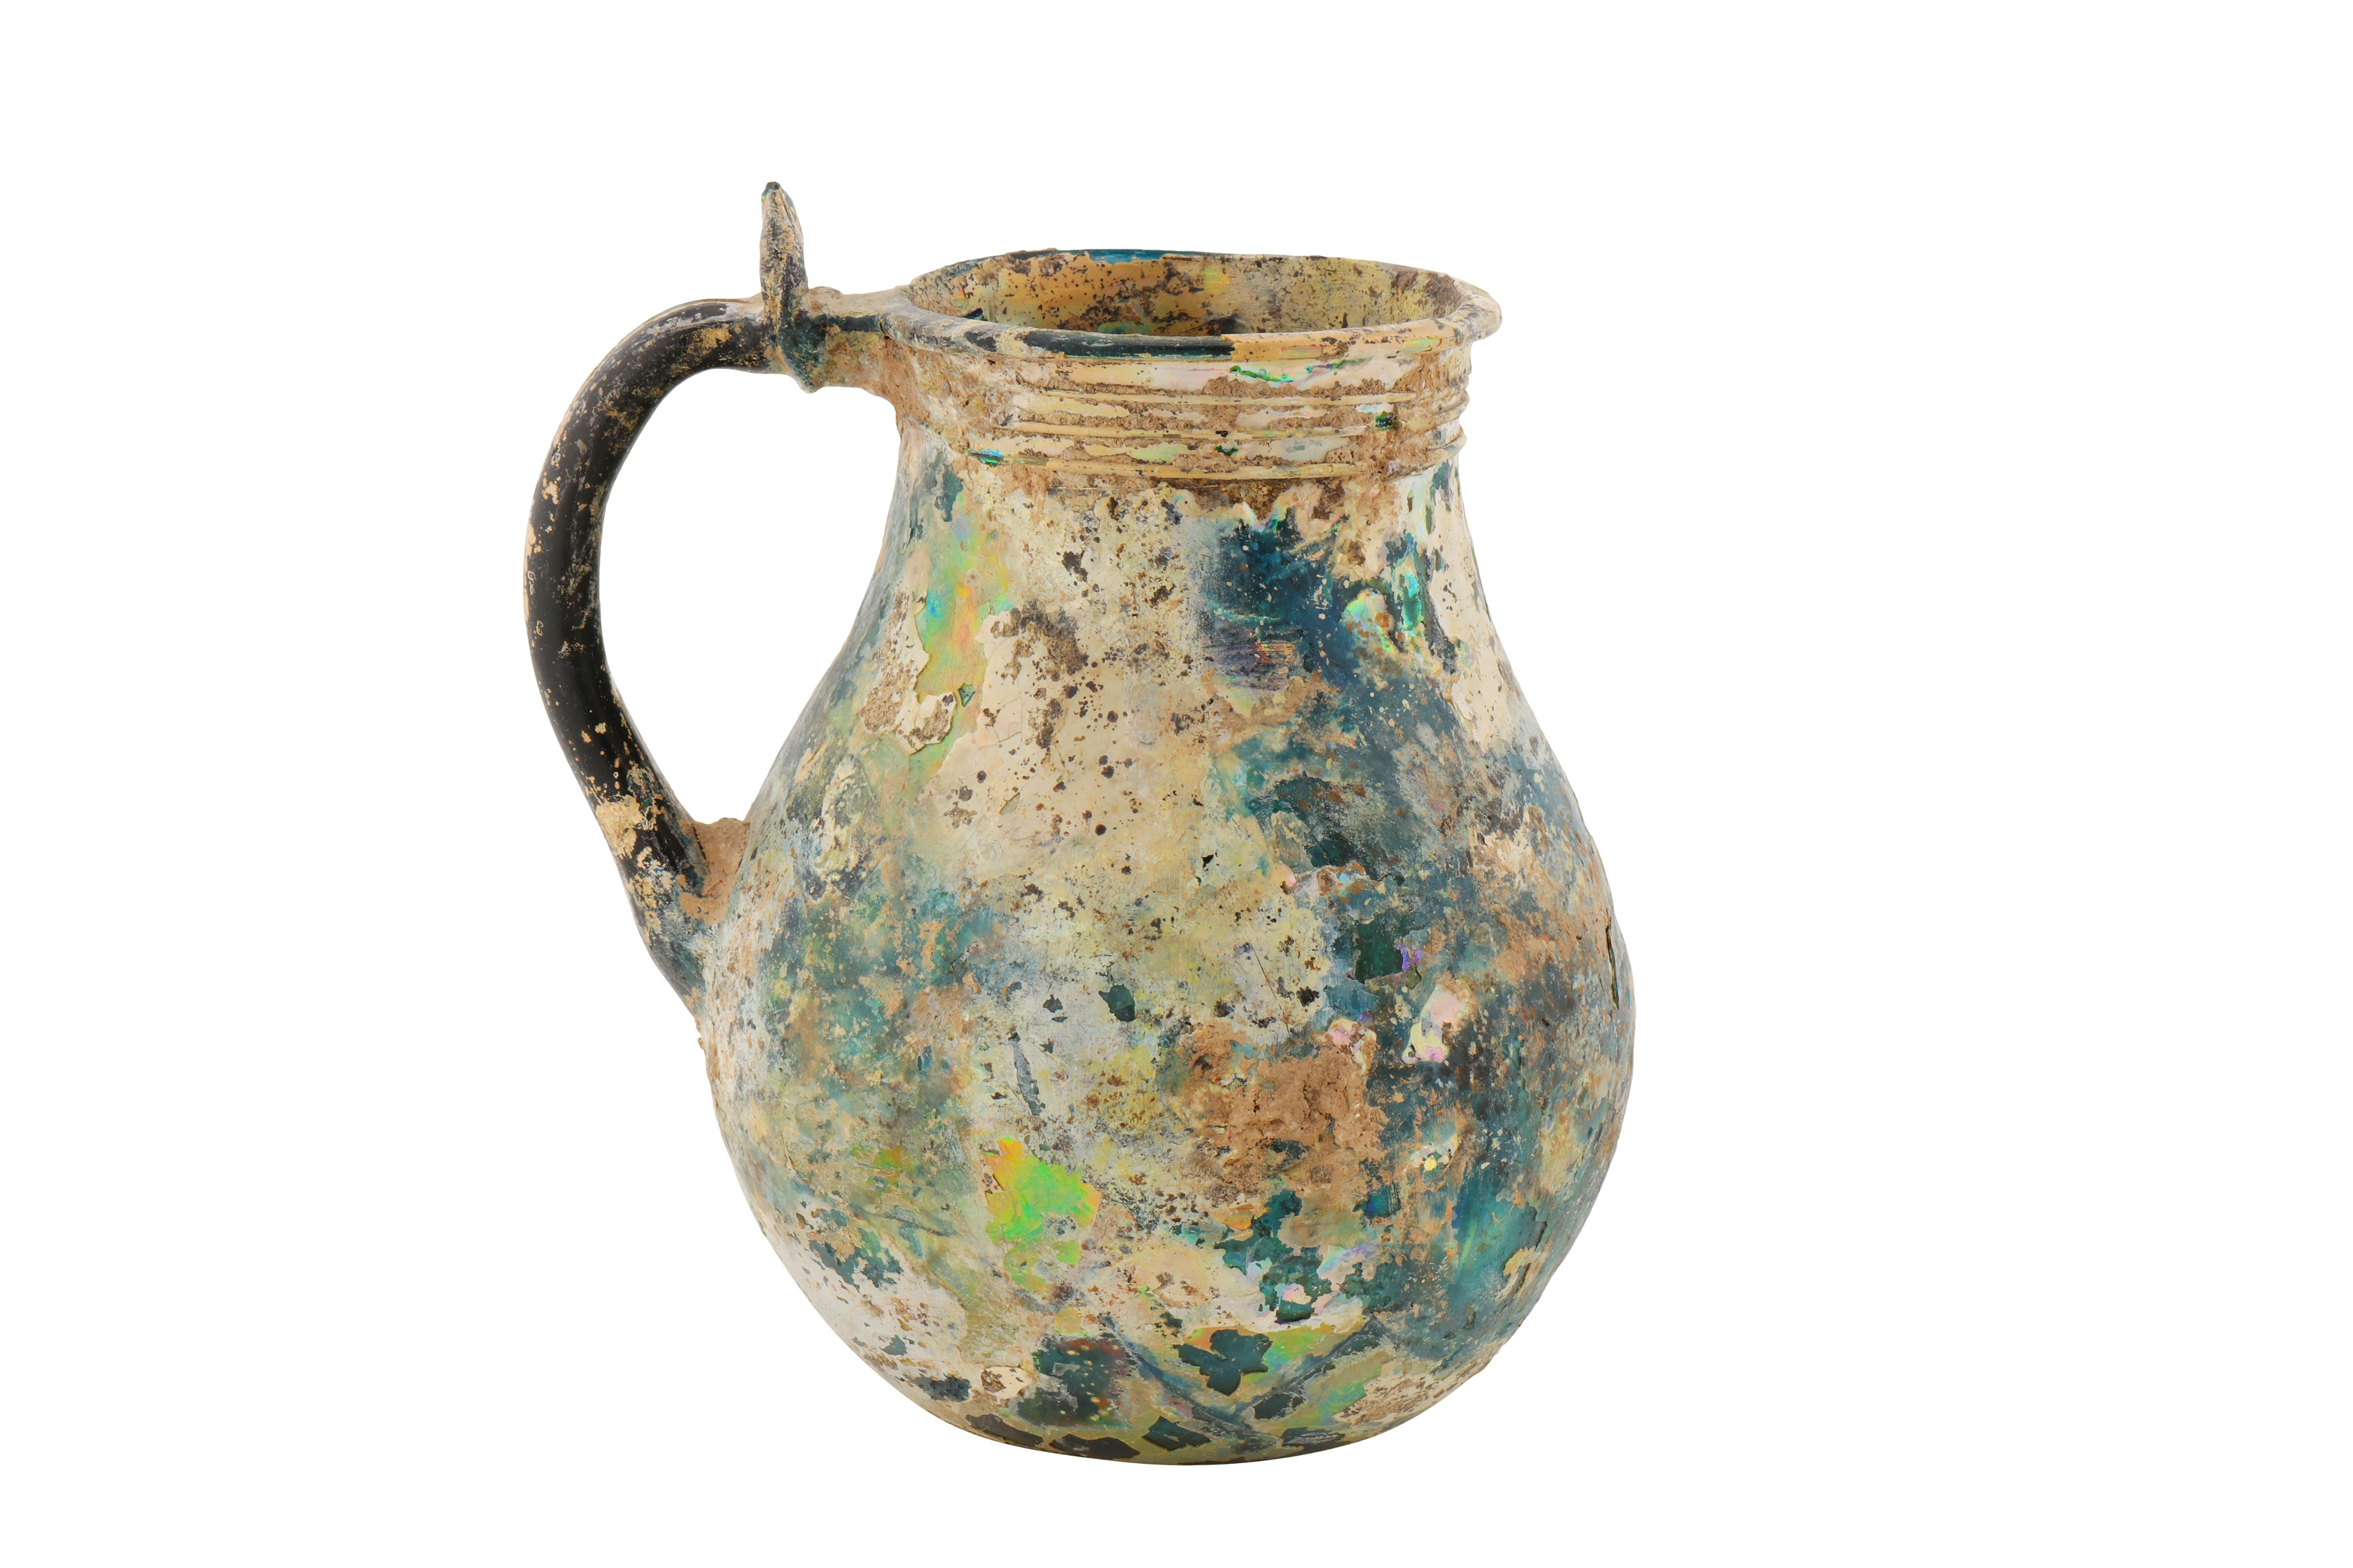 AN EARLY 10TH -12TH CENTURY IRIDESCENT GLASS VESSEL - Image 2 of 4